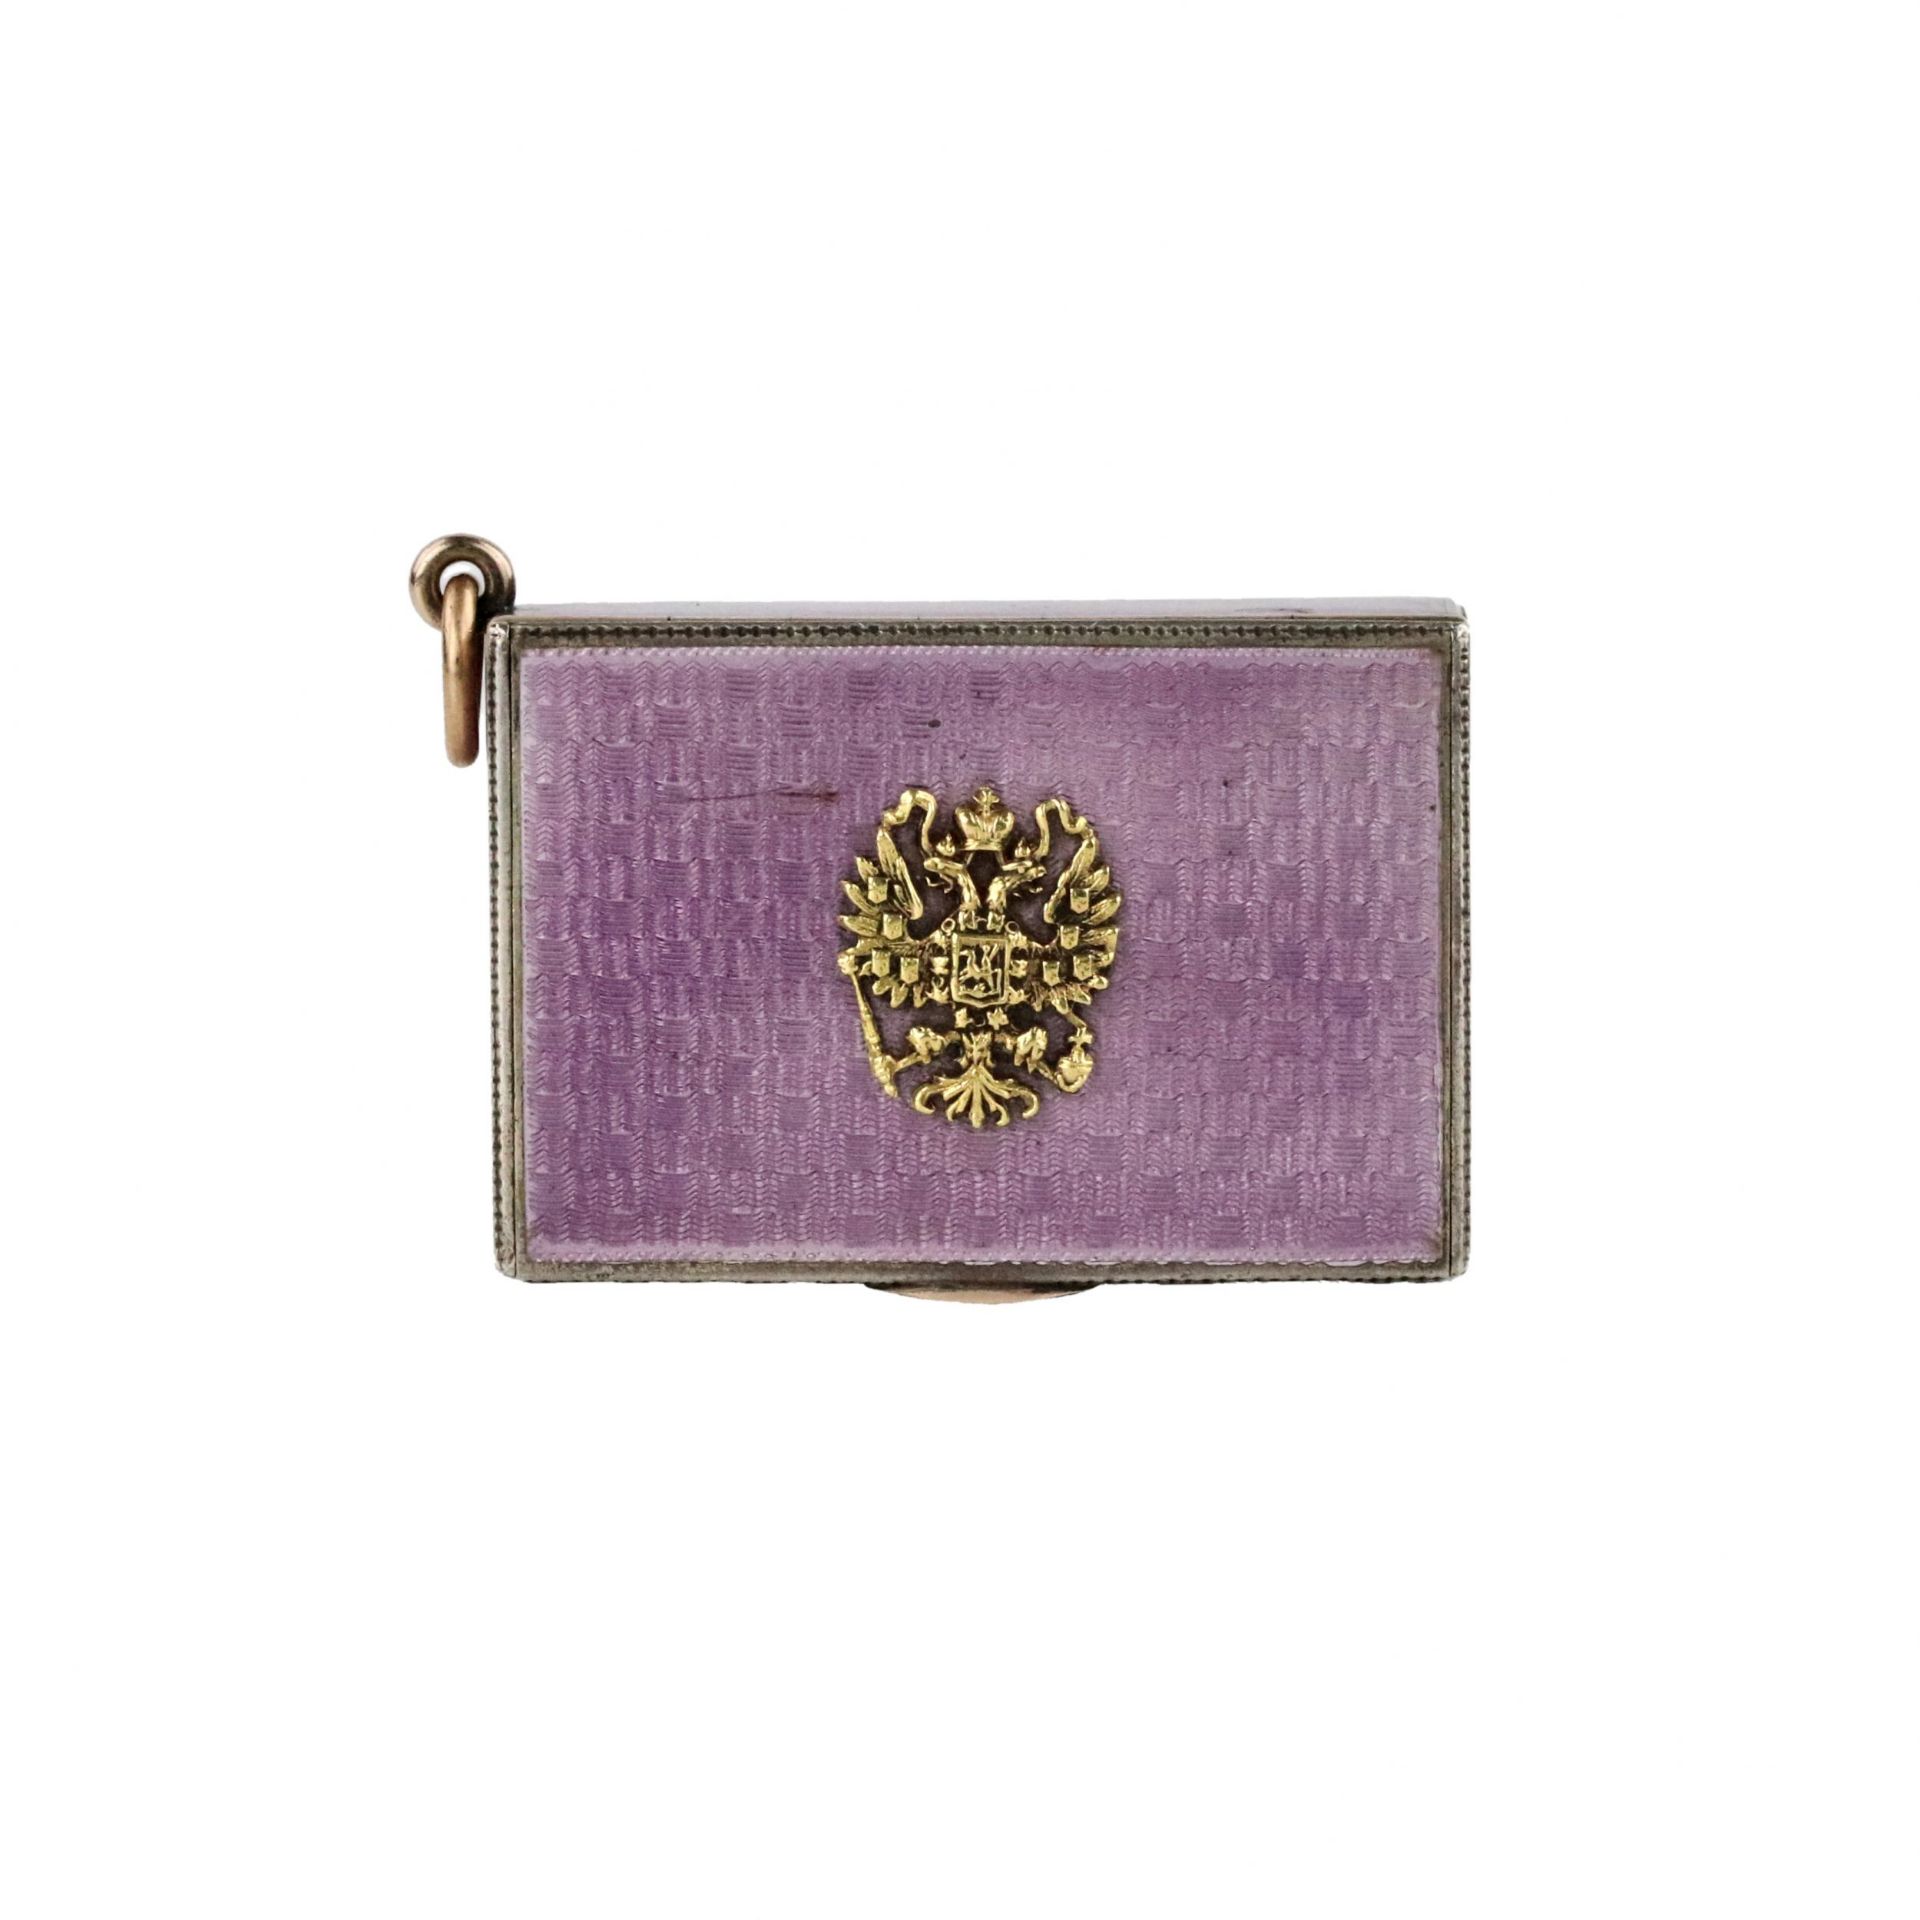 Silver snuff box-keychain of guilloche enamel with the coat of arms of Russia made of gold. - Image 3 of 7